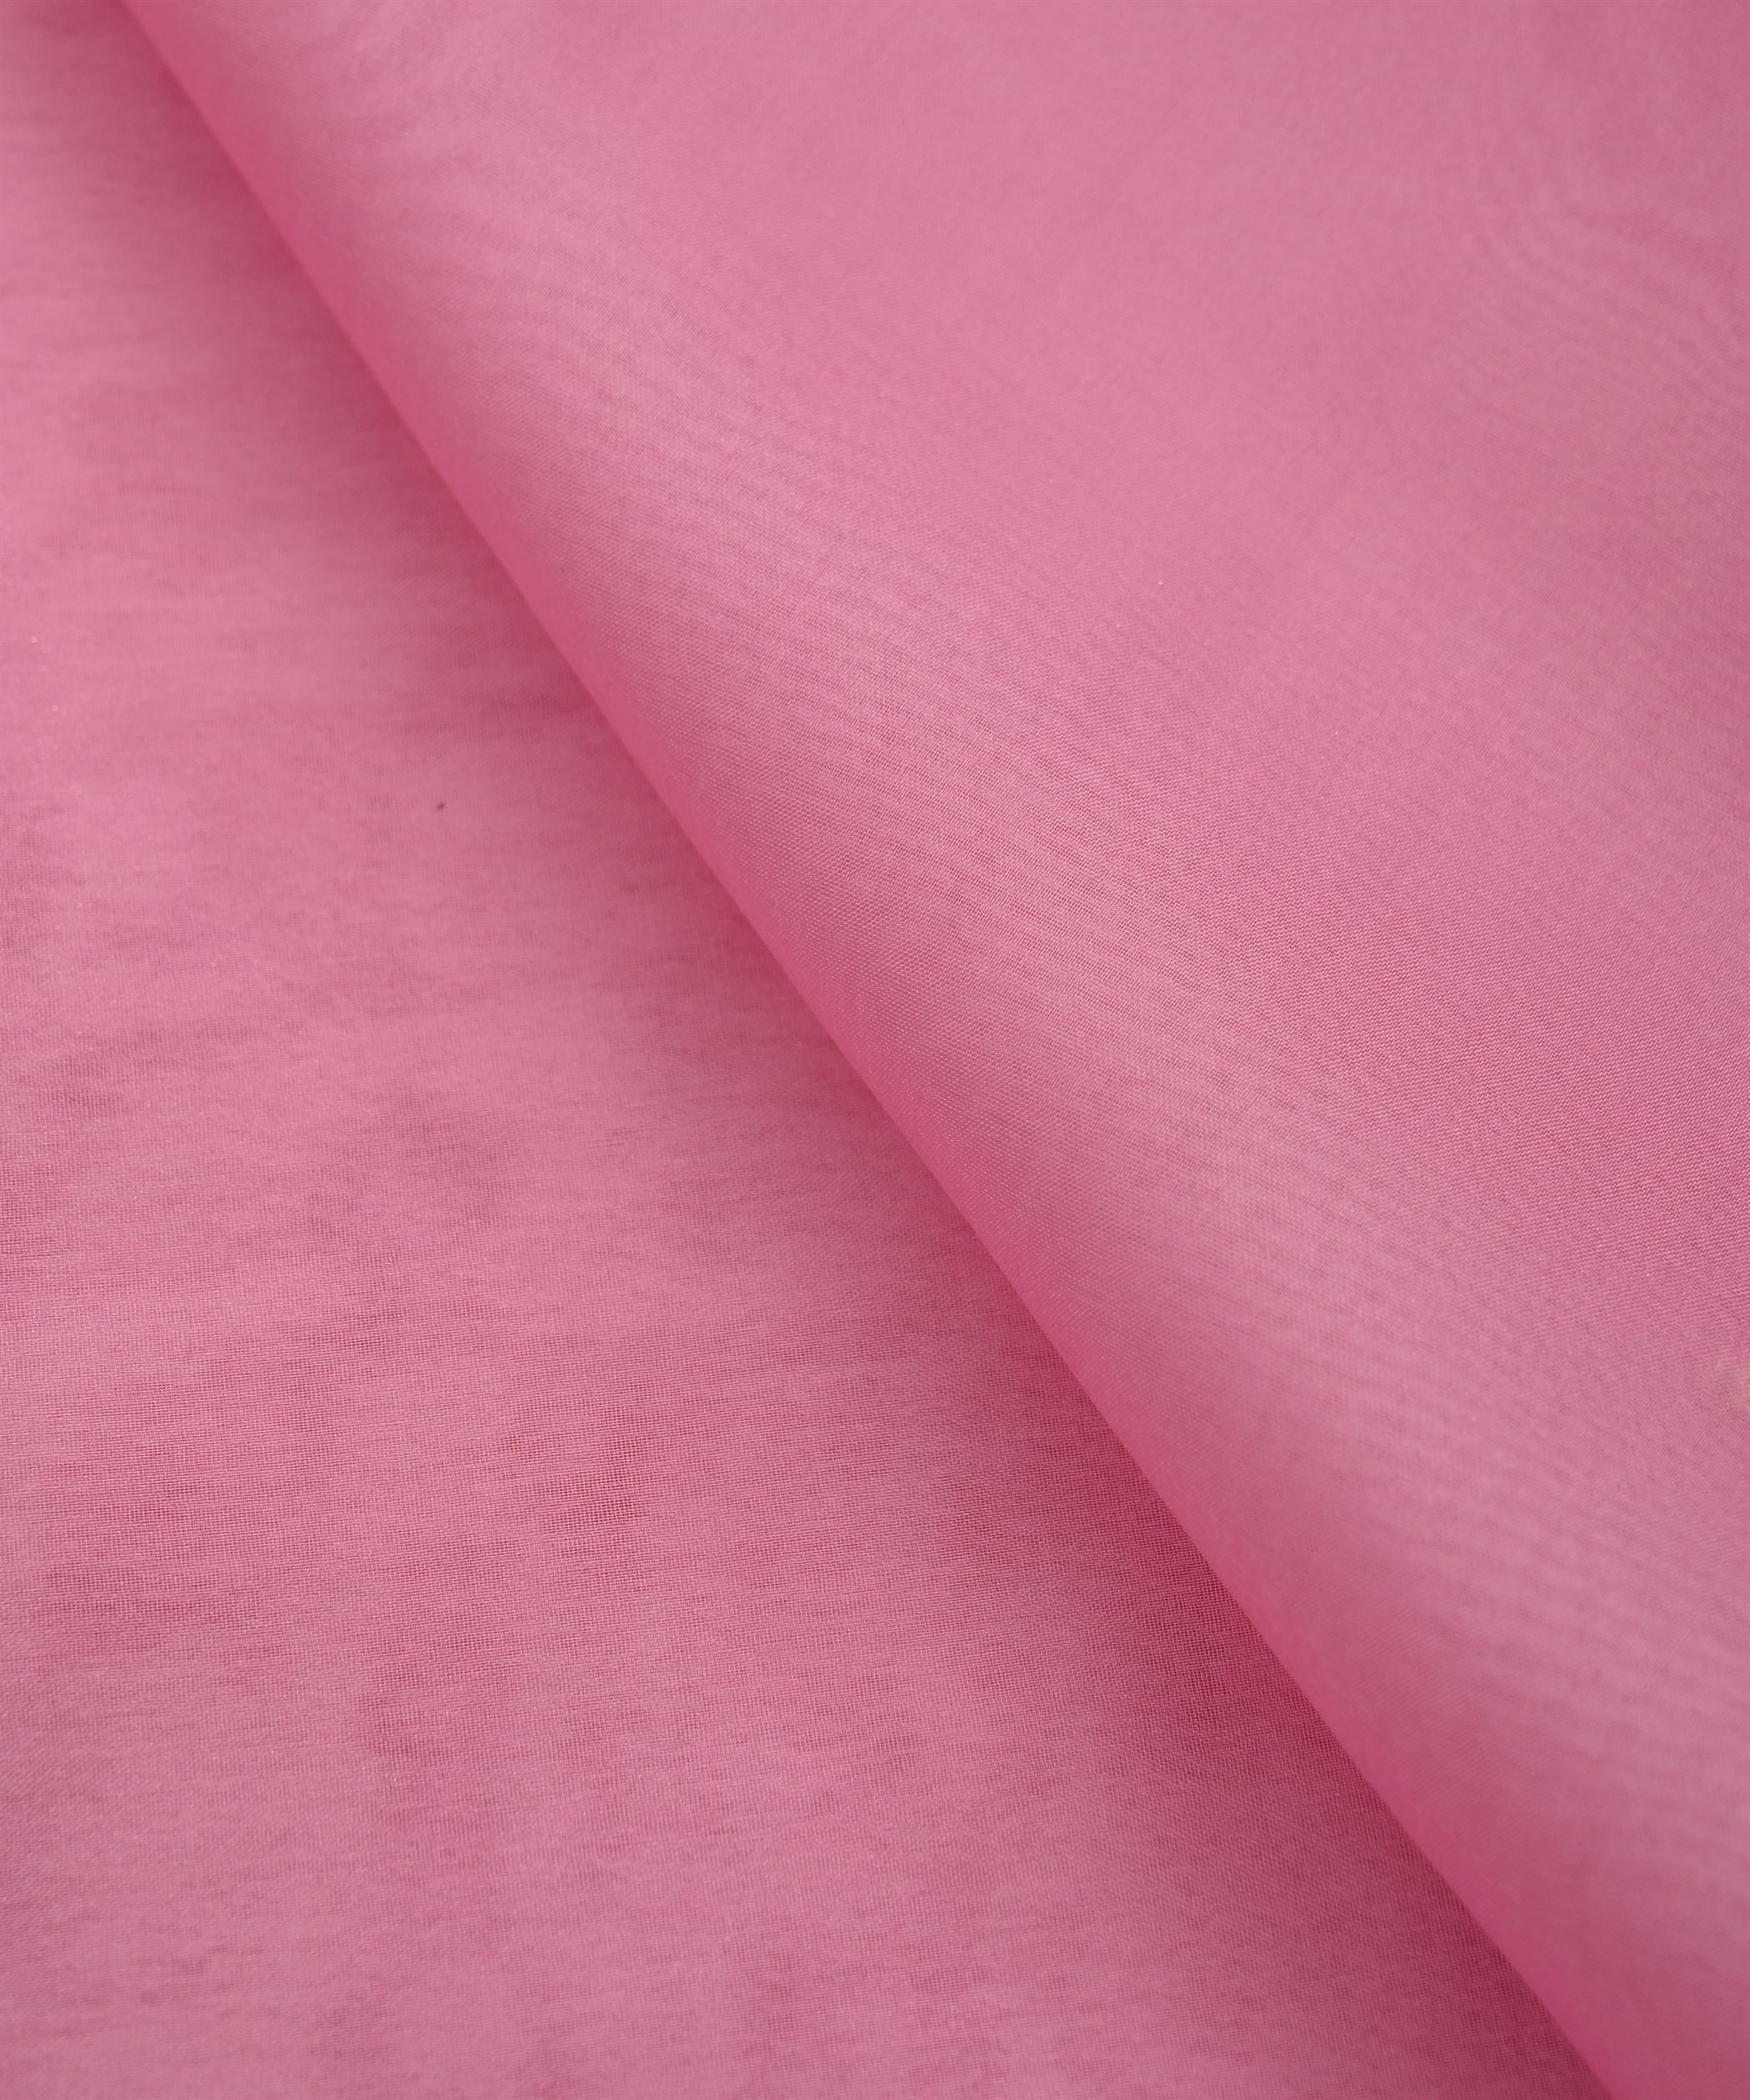 Baby Pink Plain Dyed Organza Fabric